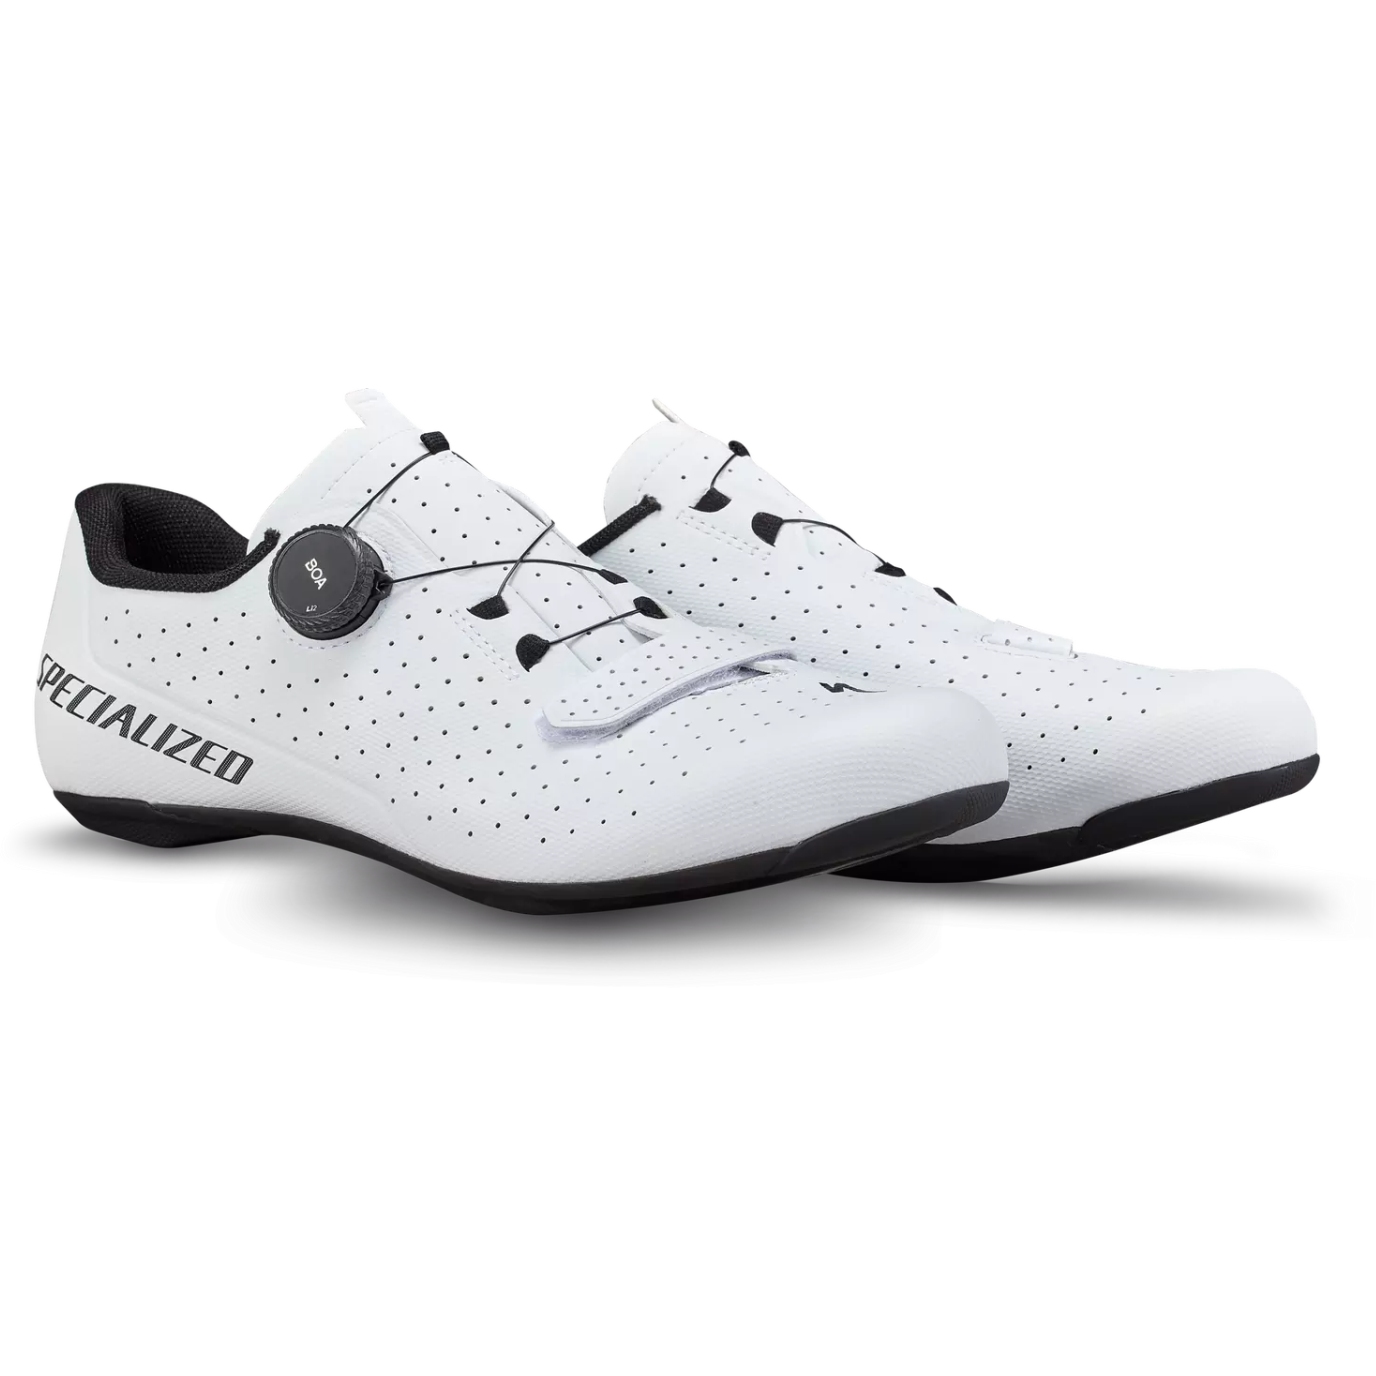 Image of Specialized Torch 2.0 Road Shoes - White